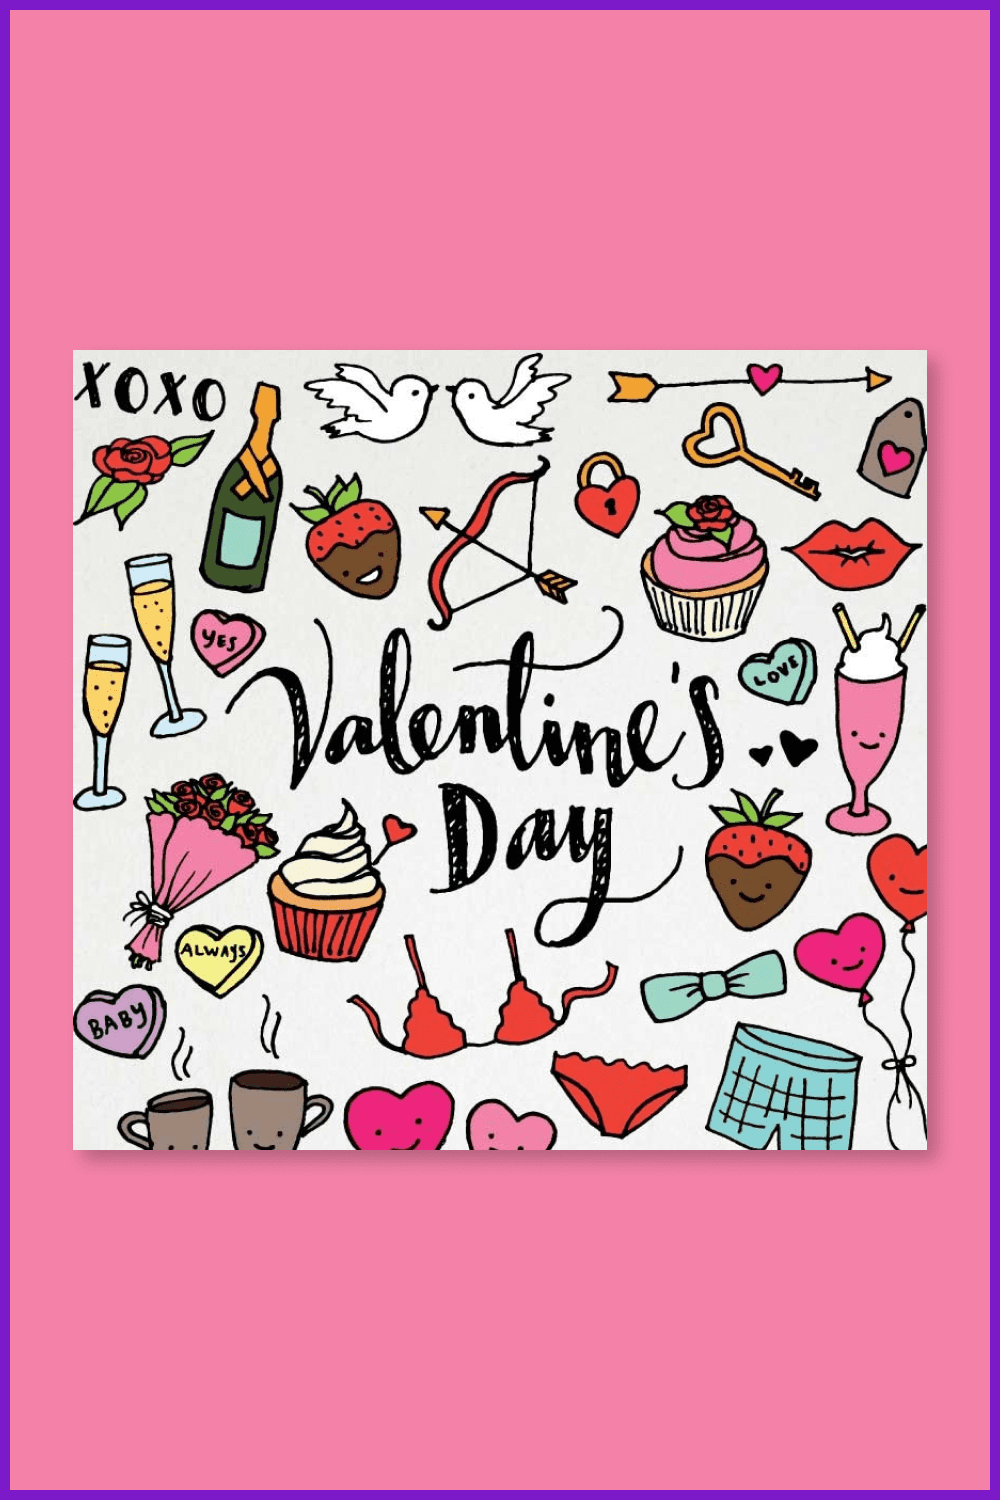 Valentine’s Day & Love Hand Sketched Clipart Pack Illustration.